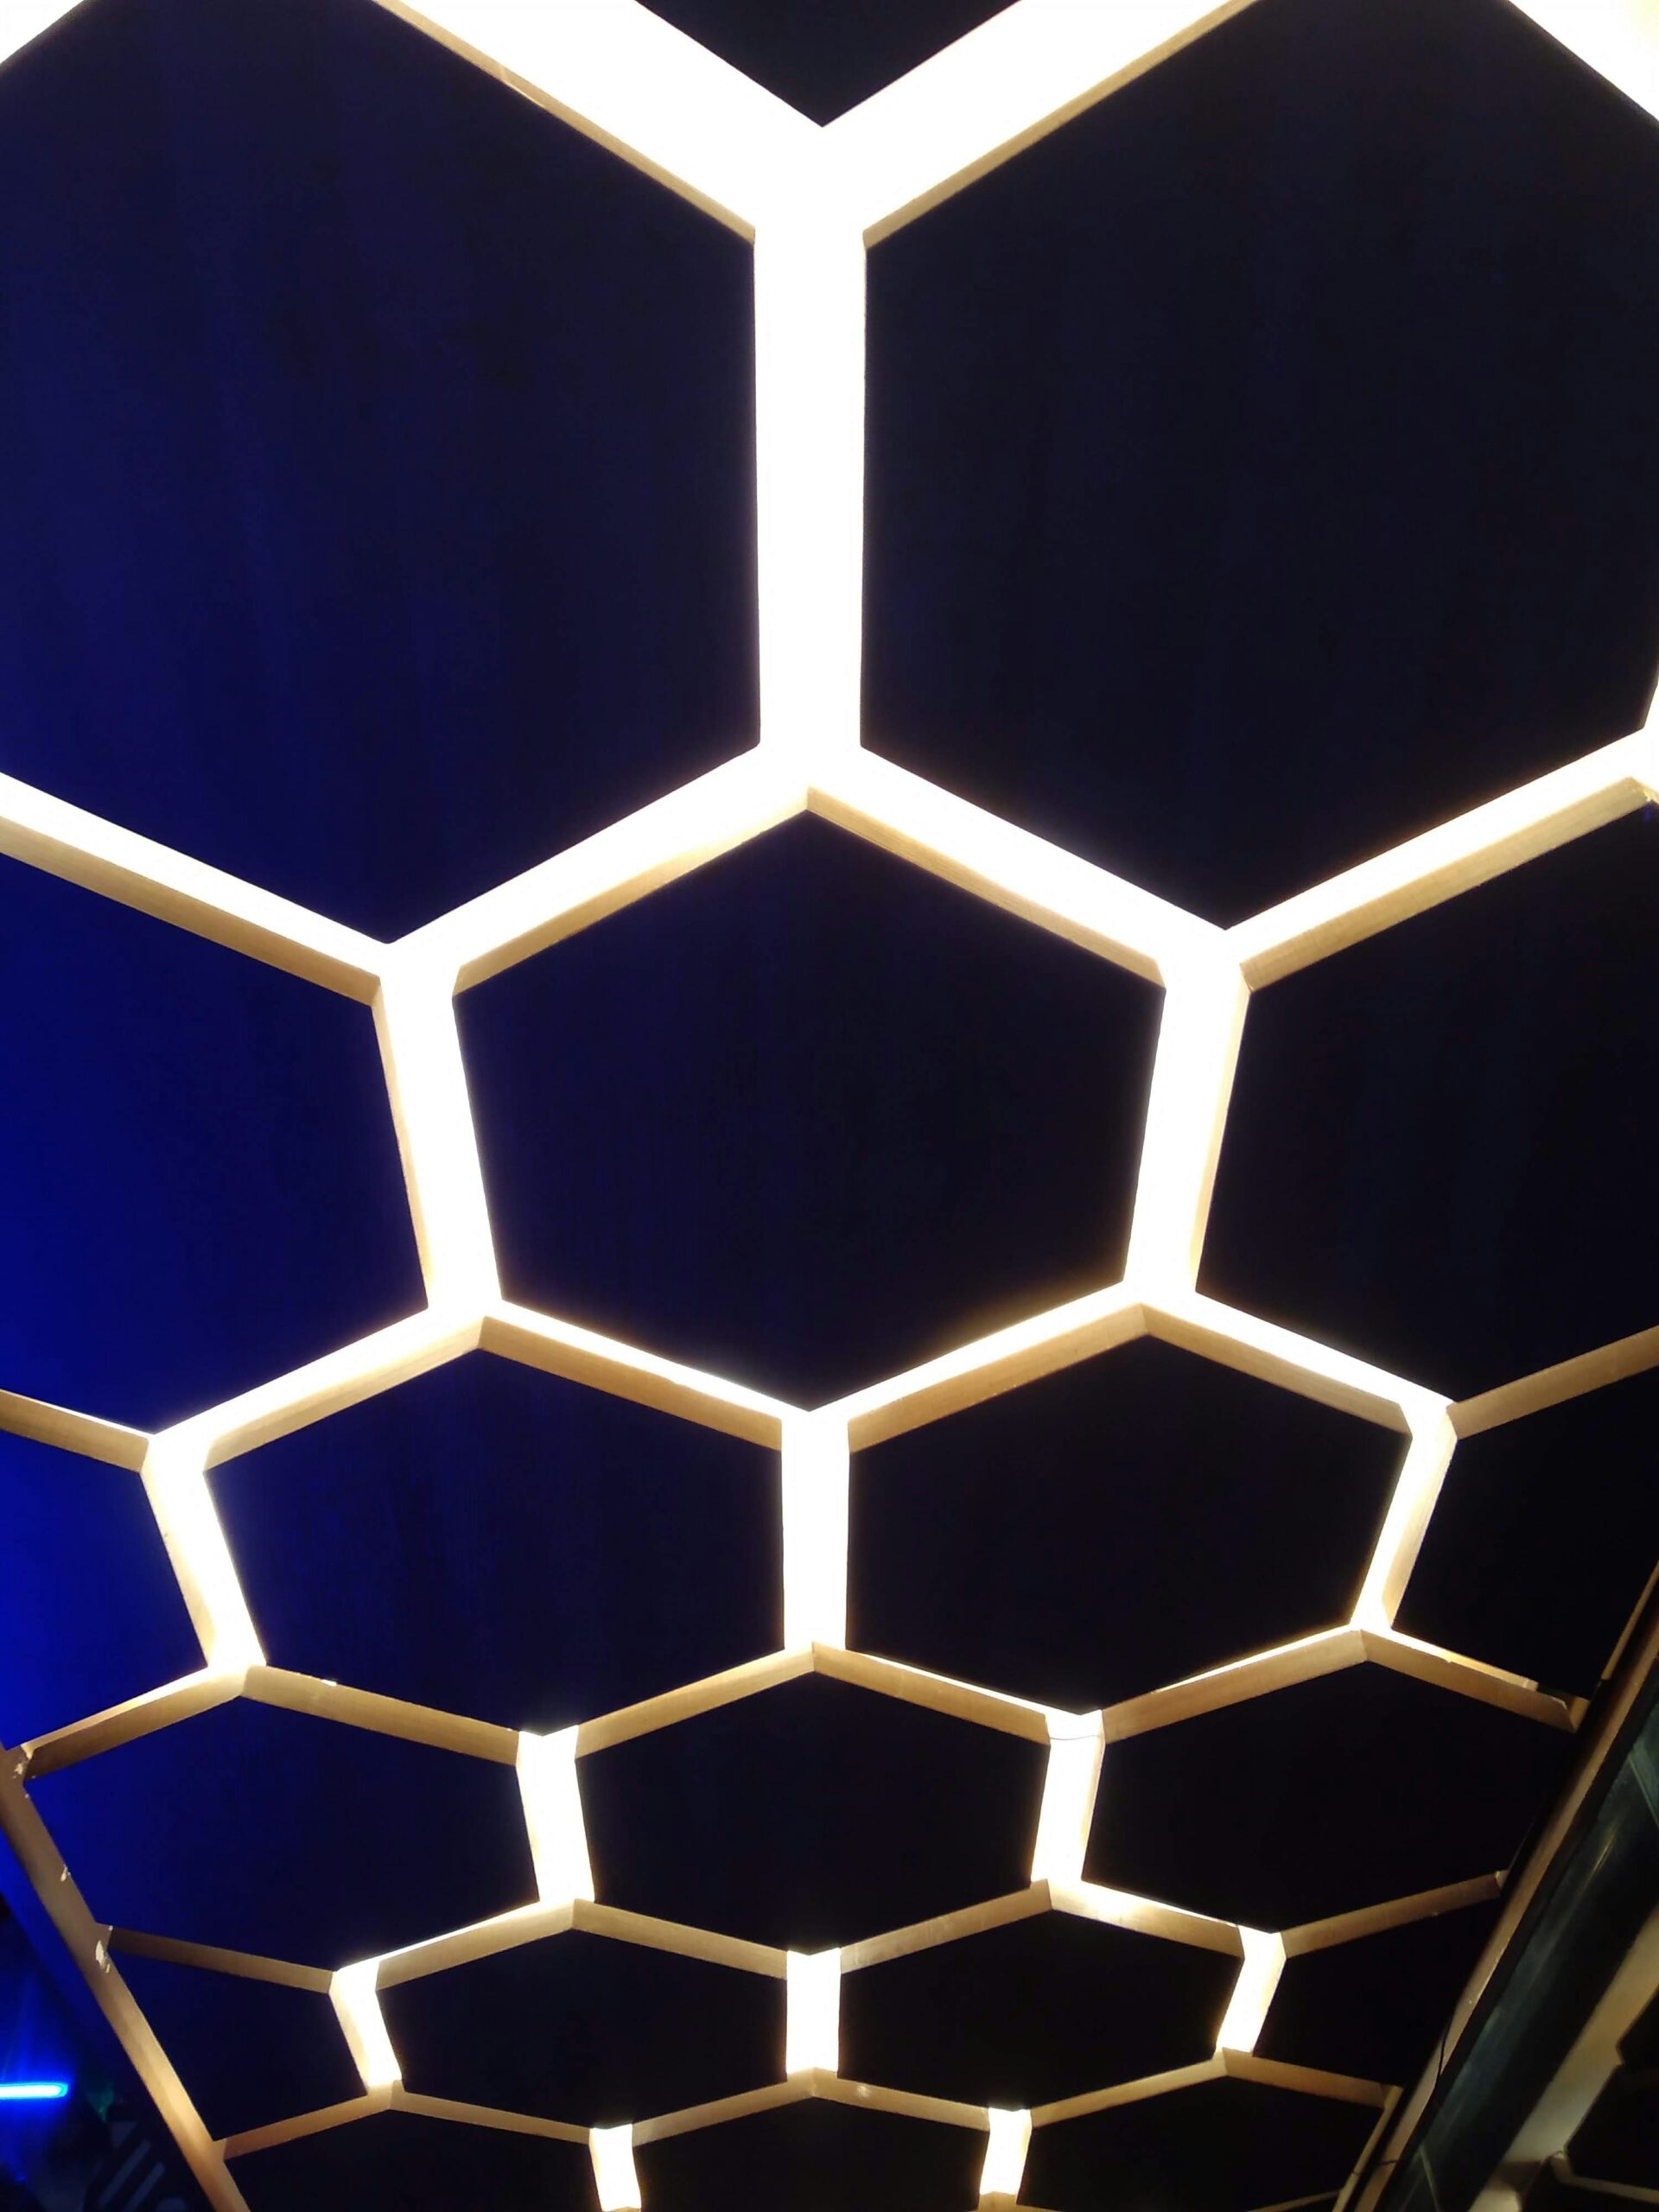 a close up of a ceiling made of hexagonal shapes